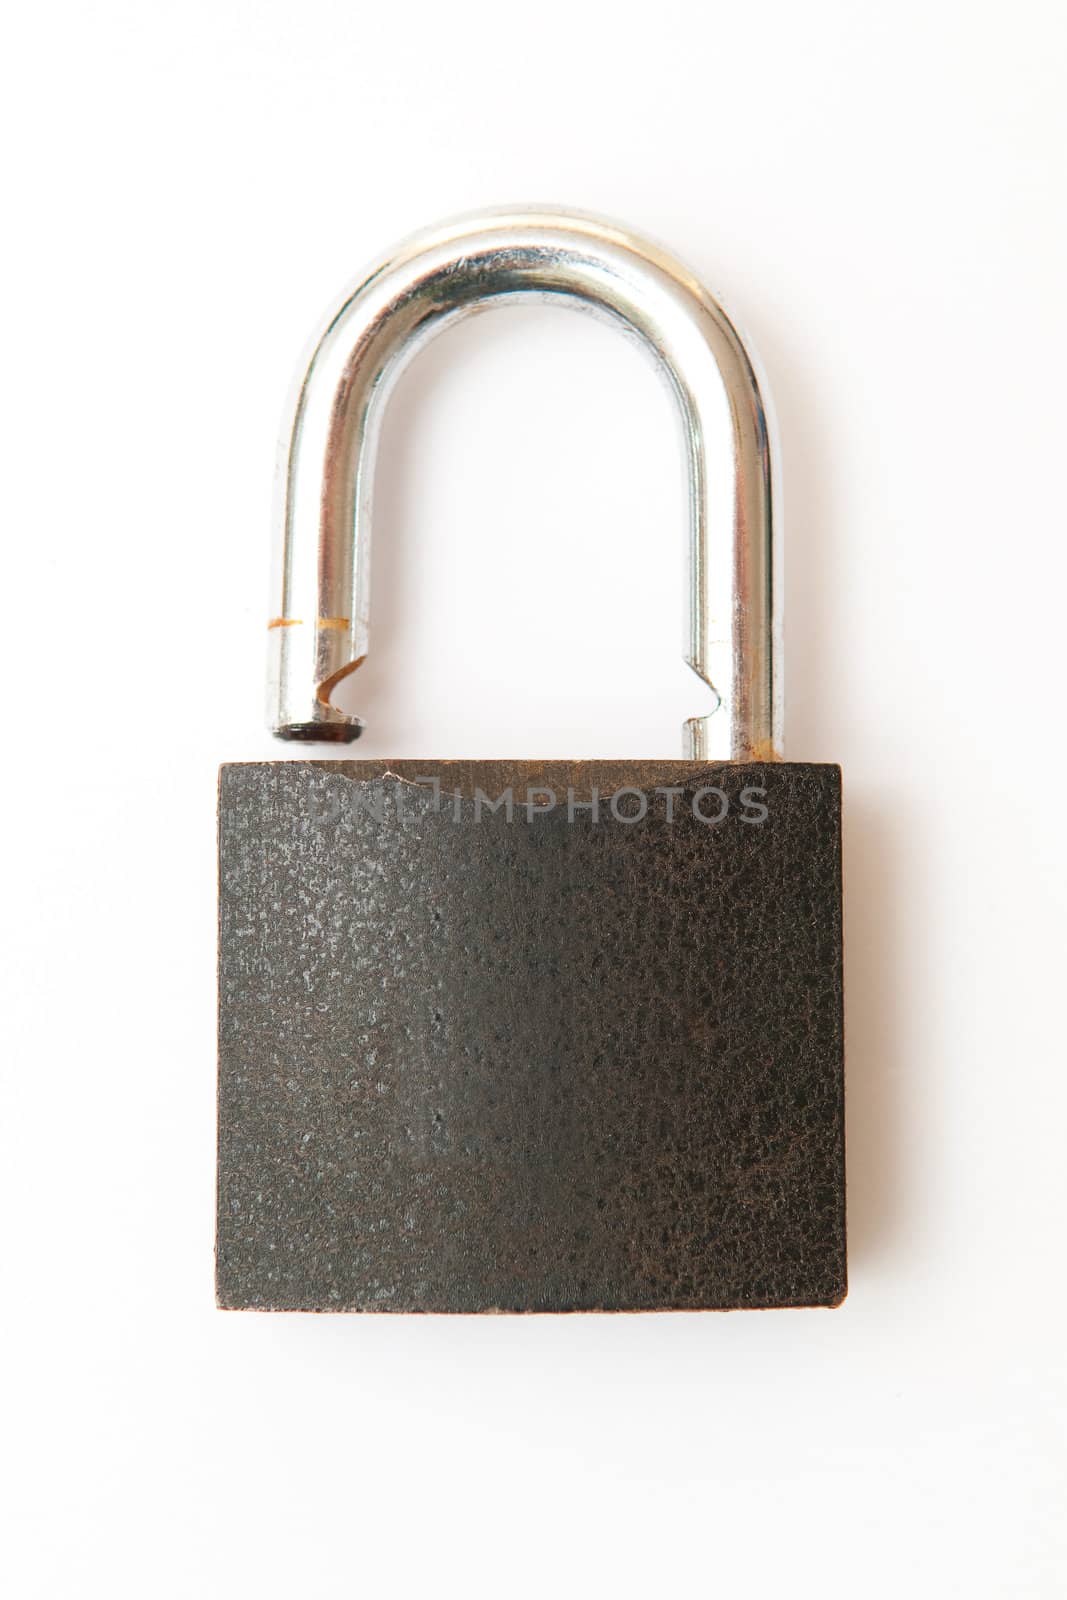 A padlock on the white background